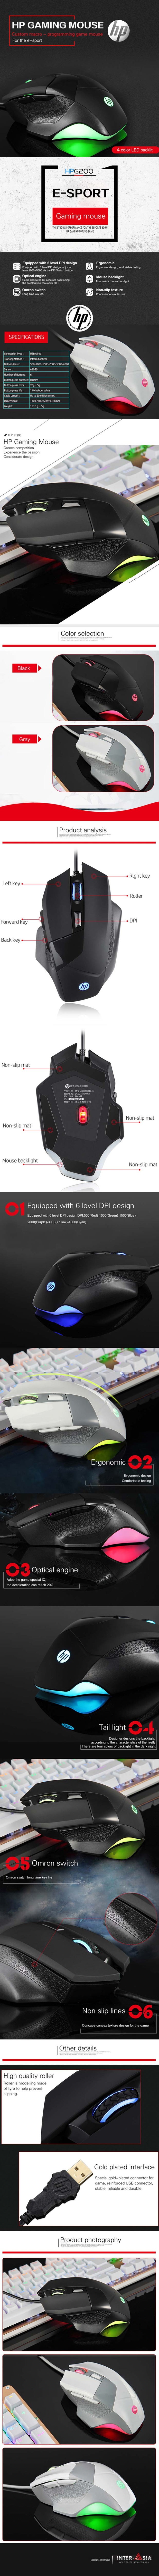 hp g200 gaming mouse